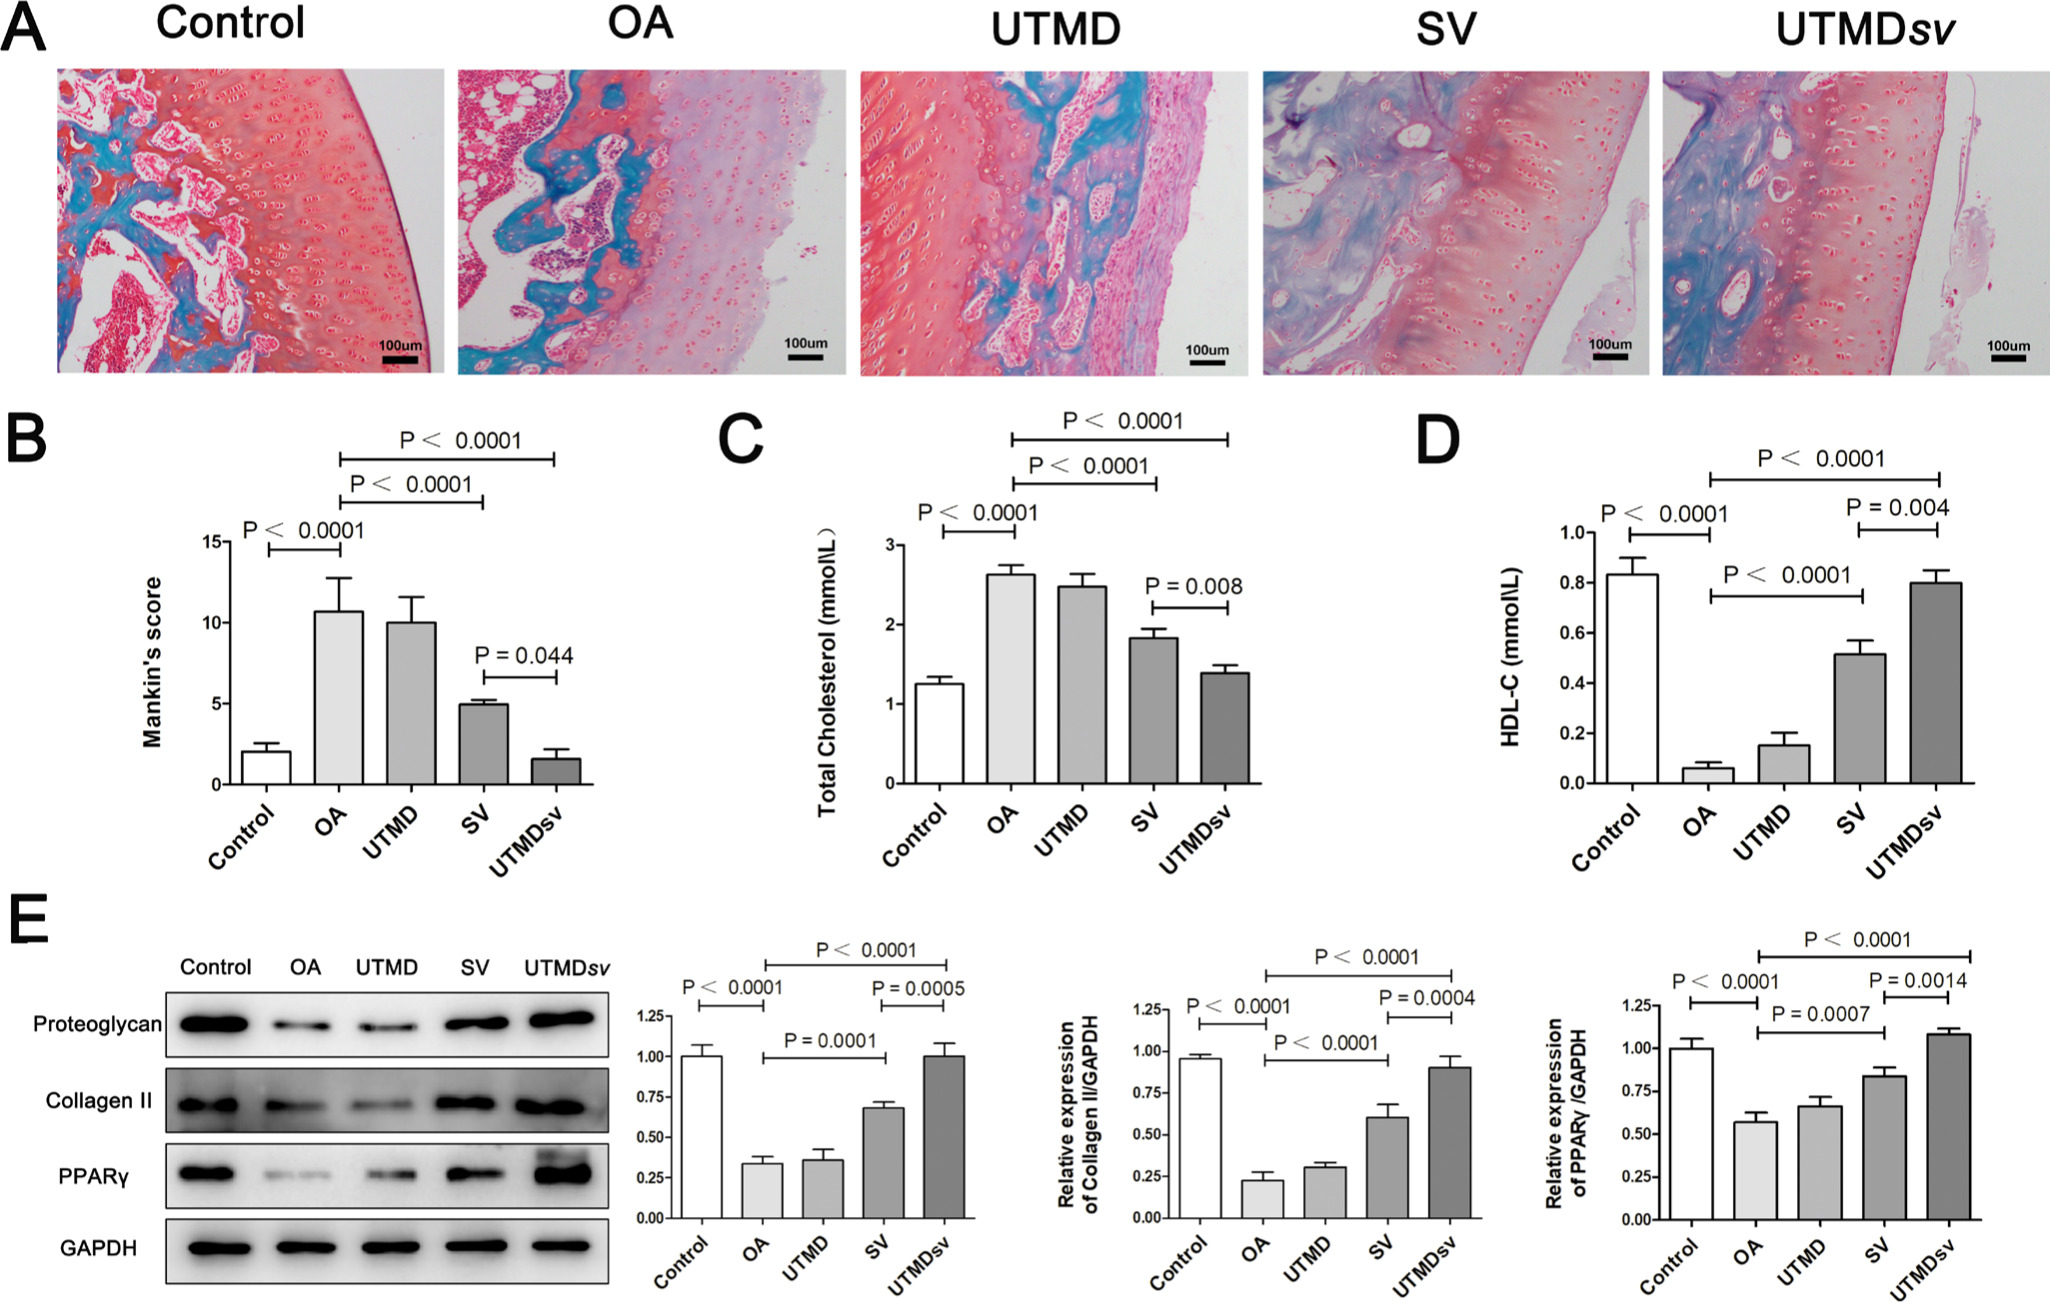 Fig. 4 
            Effects of ultrasound-targeted simvastatin-loaded microbubble destruction (UTMDSV) on cholesterol regulation and cartilage metabolism in osteoarthritic (OA) rabbit. Animals were respectively treated with UTMD, SV, and UTMDSV every seven days for four weeks. Equivalent saline was administered into the control and OA groups. a) and b) The representative safranin-O images and Mankin scoring of OA parameters (n = 3). c) and d) The levels of total cholesterol (TC) and high-density lipoprotein cholesterol (HDL-C) in rabbit knee synovial fluid were detected by an enzyme-marker assay. e) Western blot and quantification of aggrecan, collagen II, and peroxisome proliferator-activated receptor (PPARγ) relative to glyceraldehyde 3-phosphate dehydrogenase (GADPH) (n = 3).
          